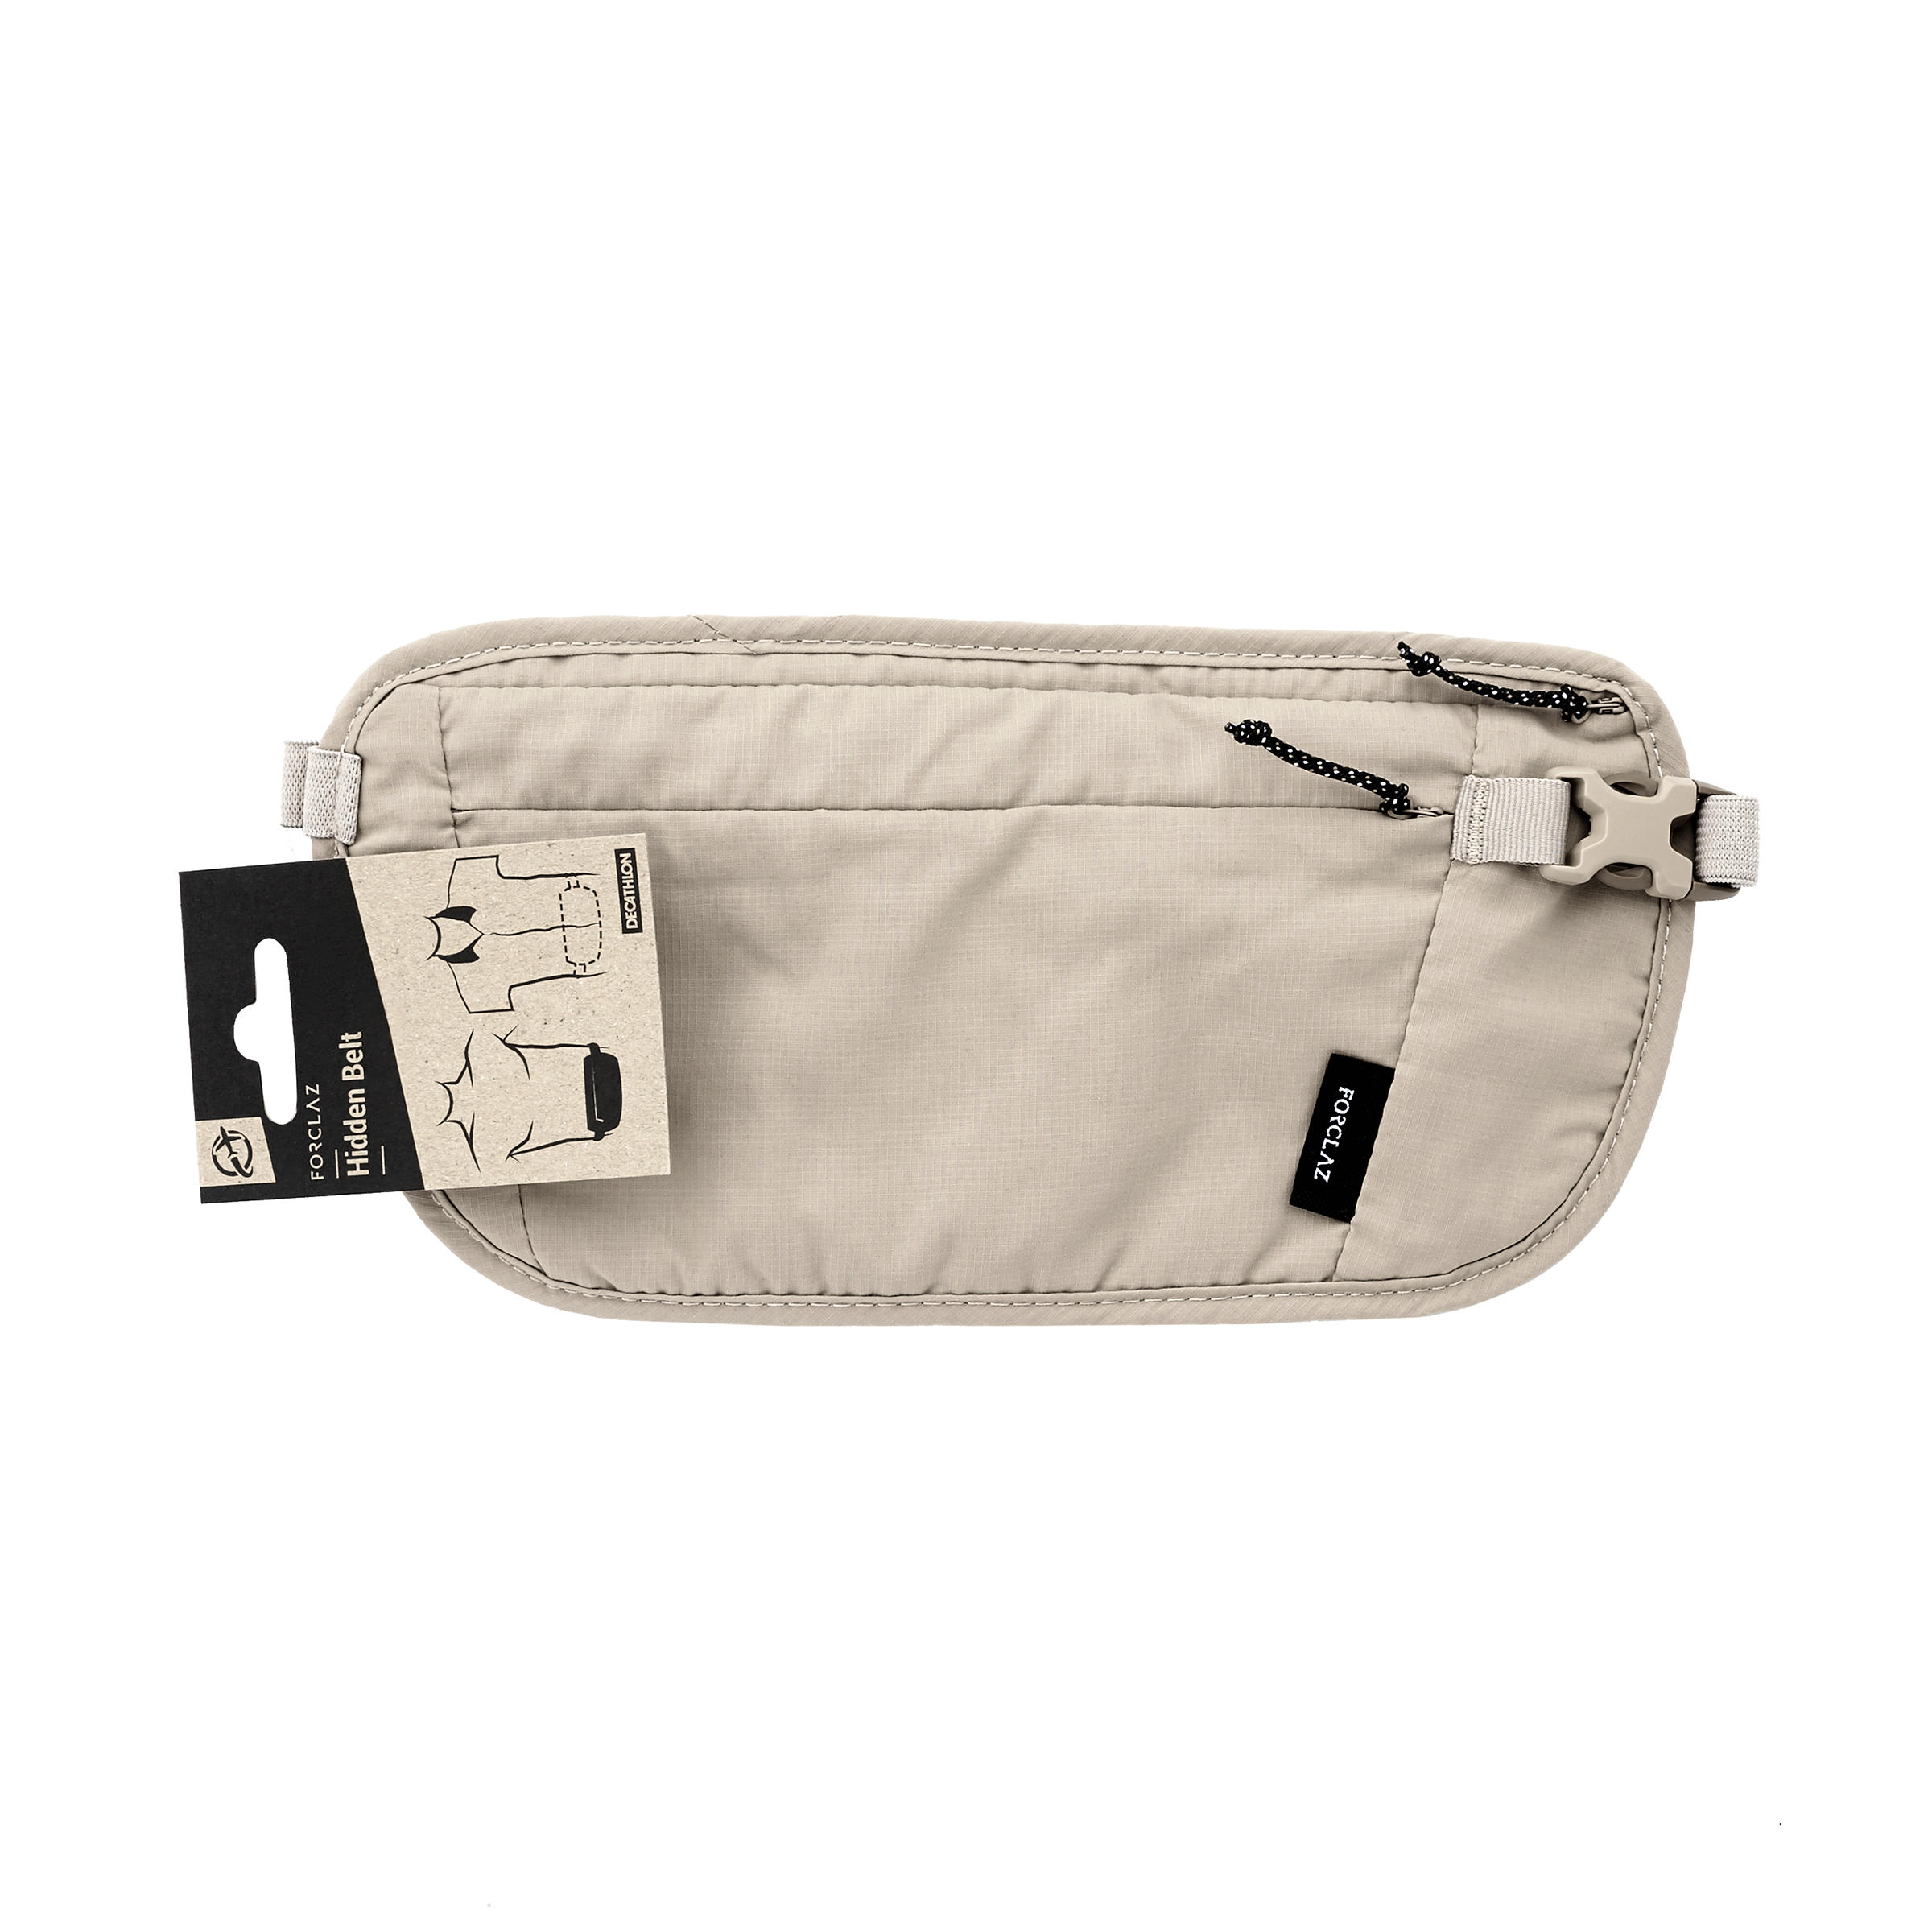 Travel Pouch/Bumbag to Travel Safely.